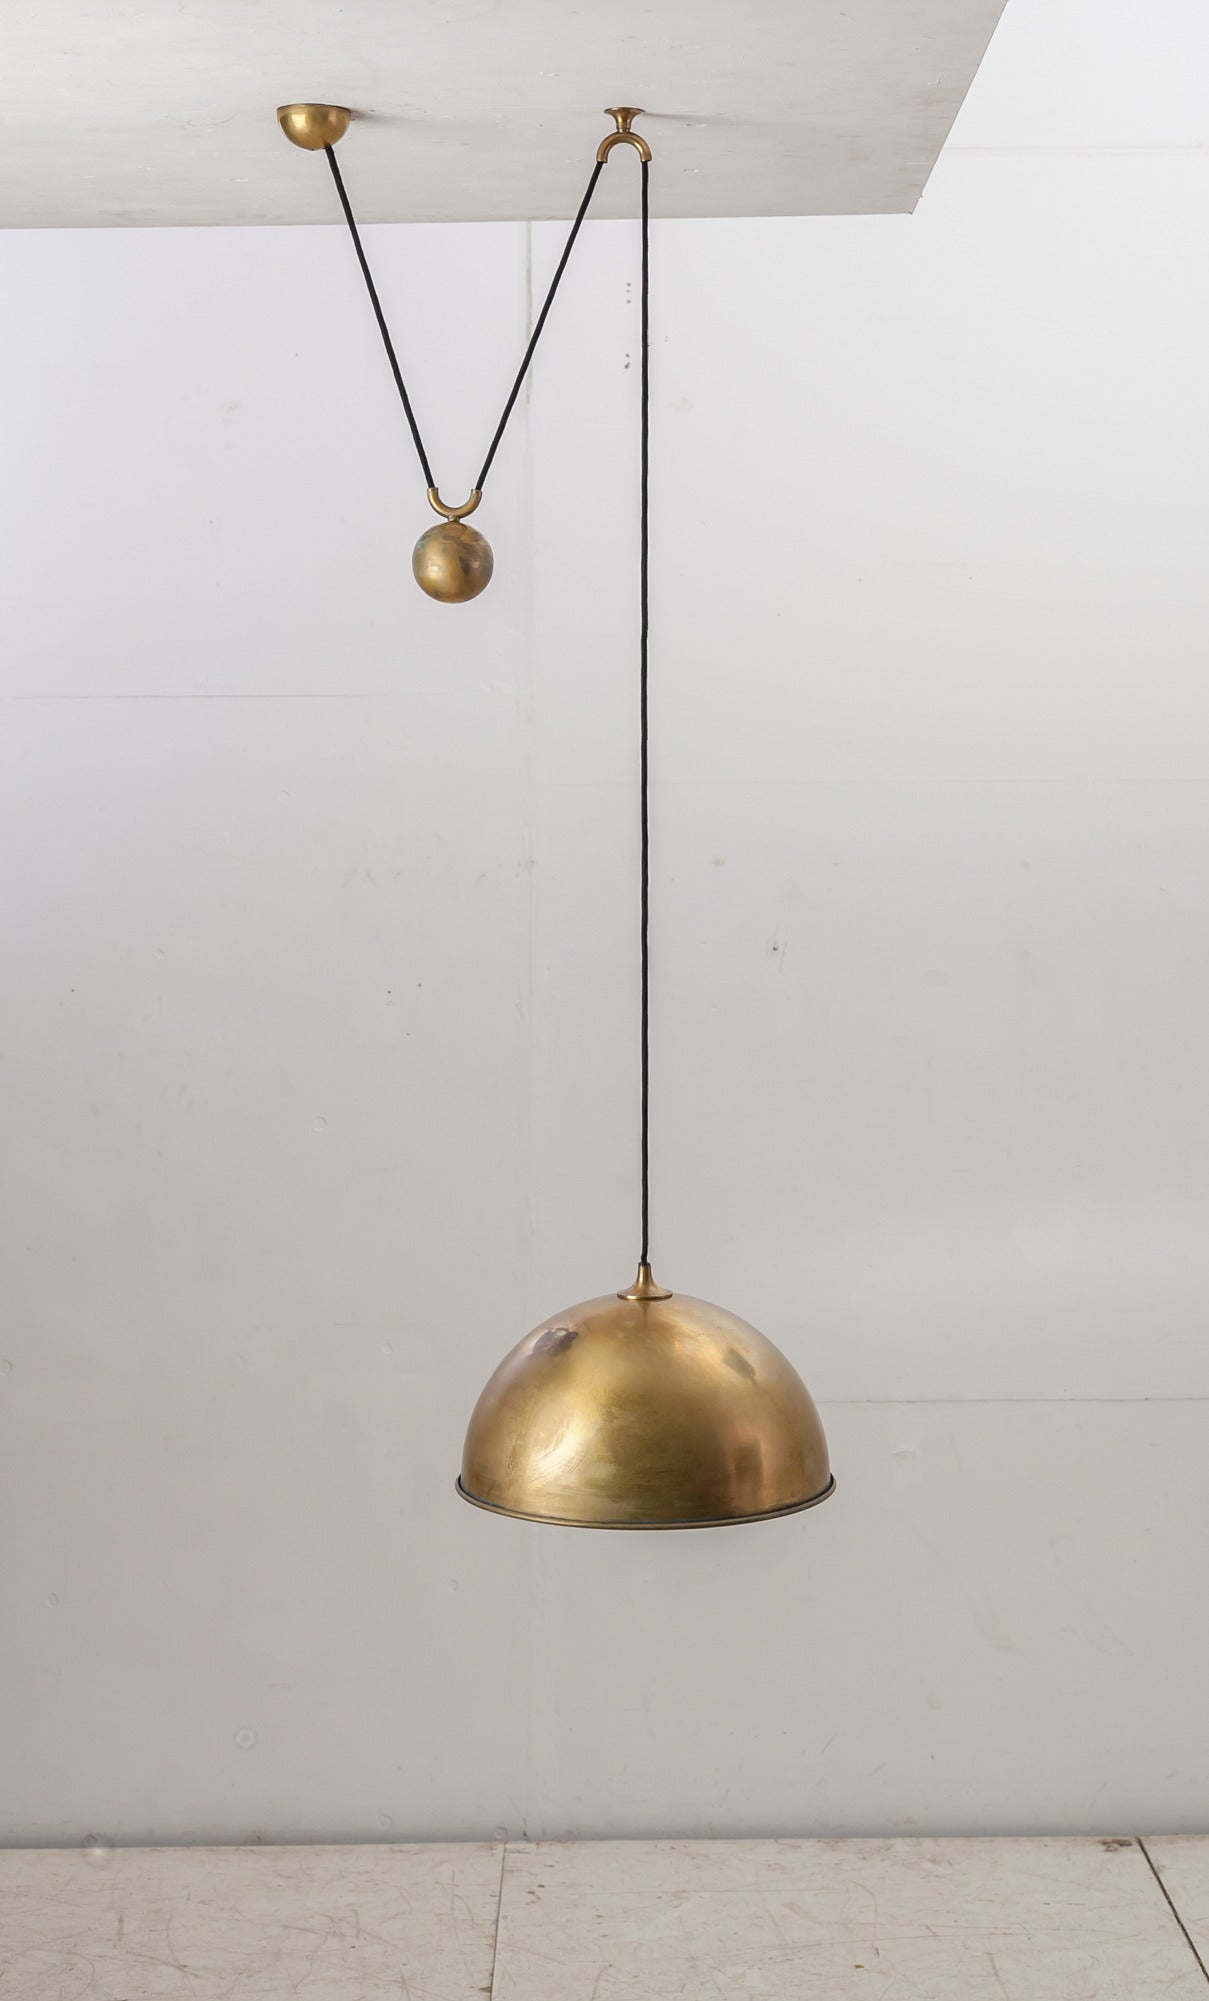 A beautiful 'Posa' pendant lamp in brass by German designer Florian Schulz. The lamp is adjustable by means of the globe shaped counterweight in the middle.
The lamp is in a very good state with a beautiful and strong patina.